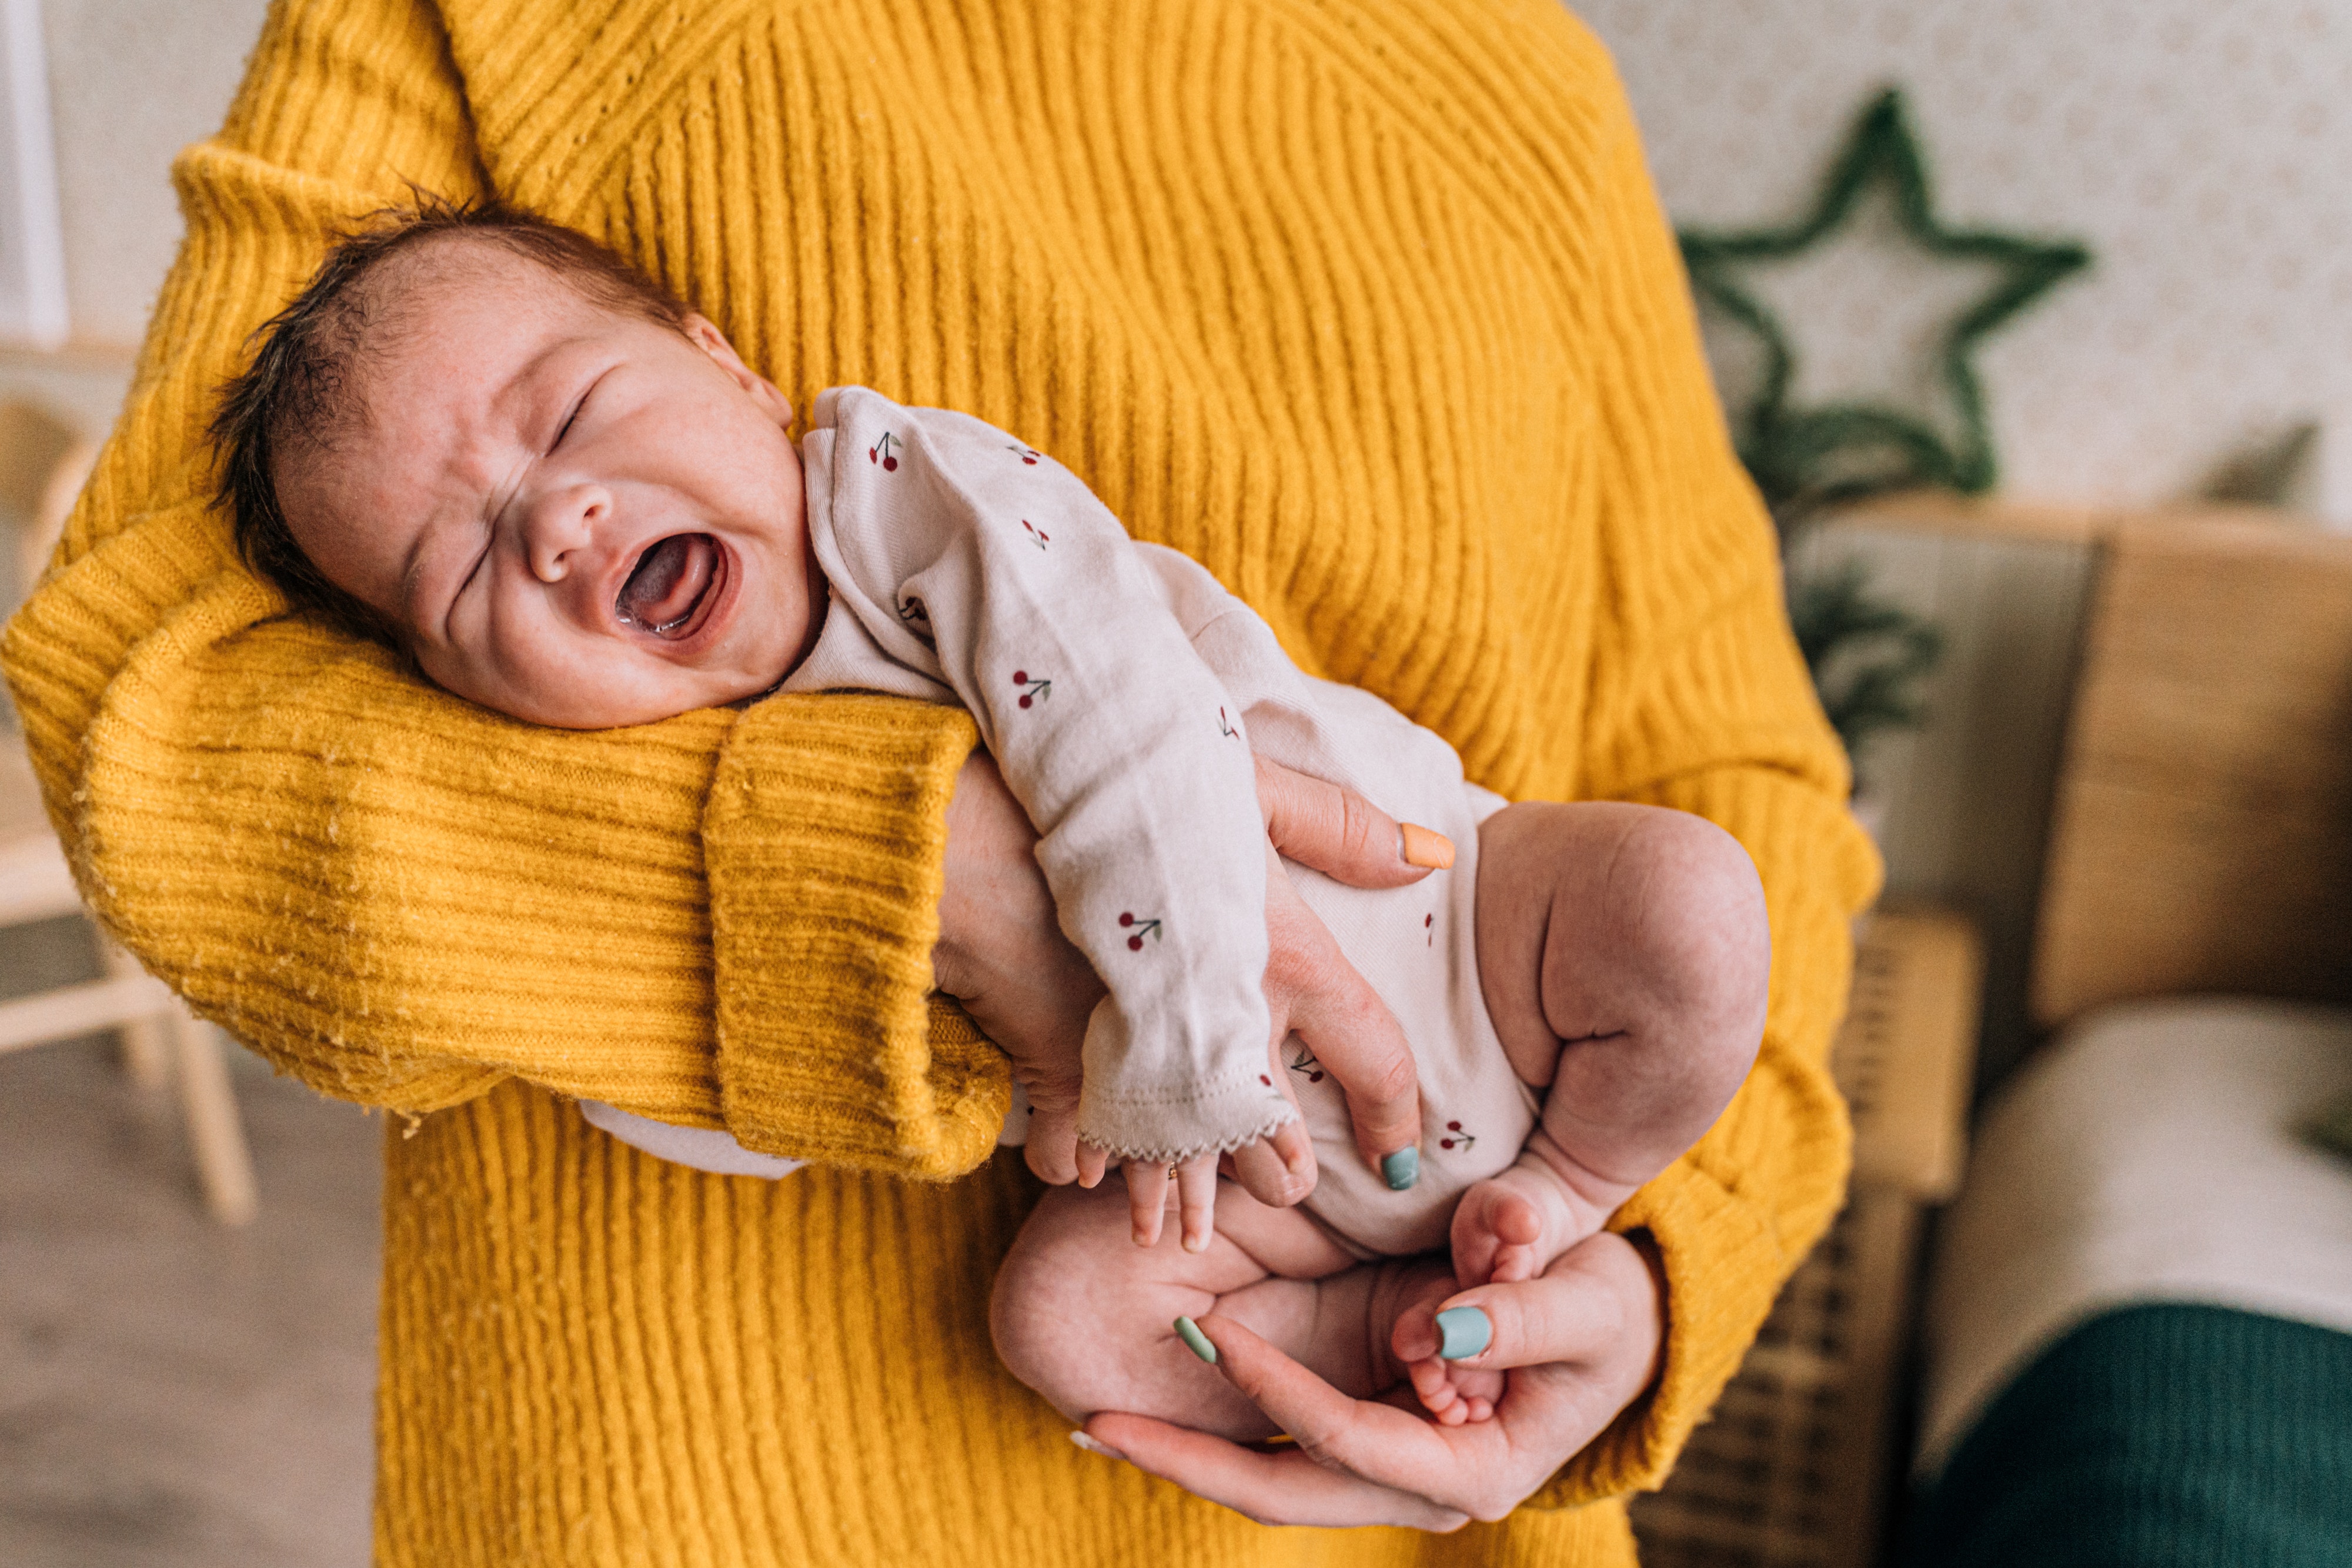 A woman cradling a crying baby | Source: Pexels